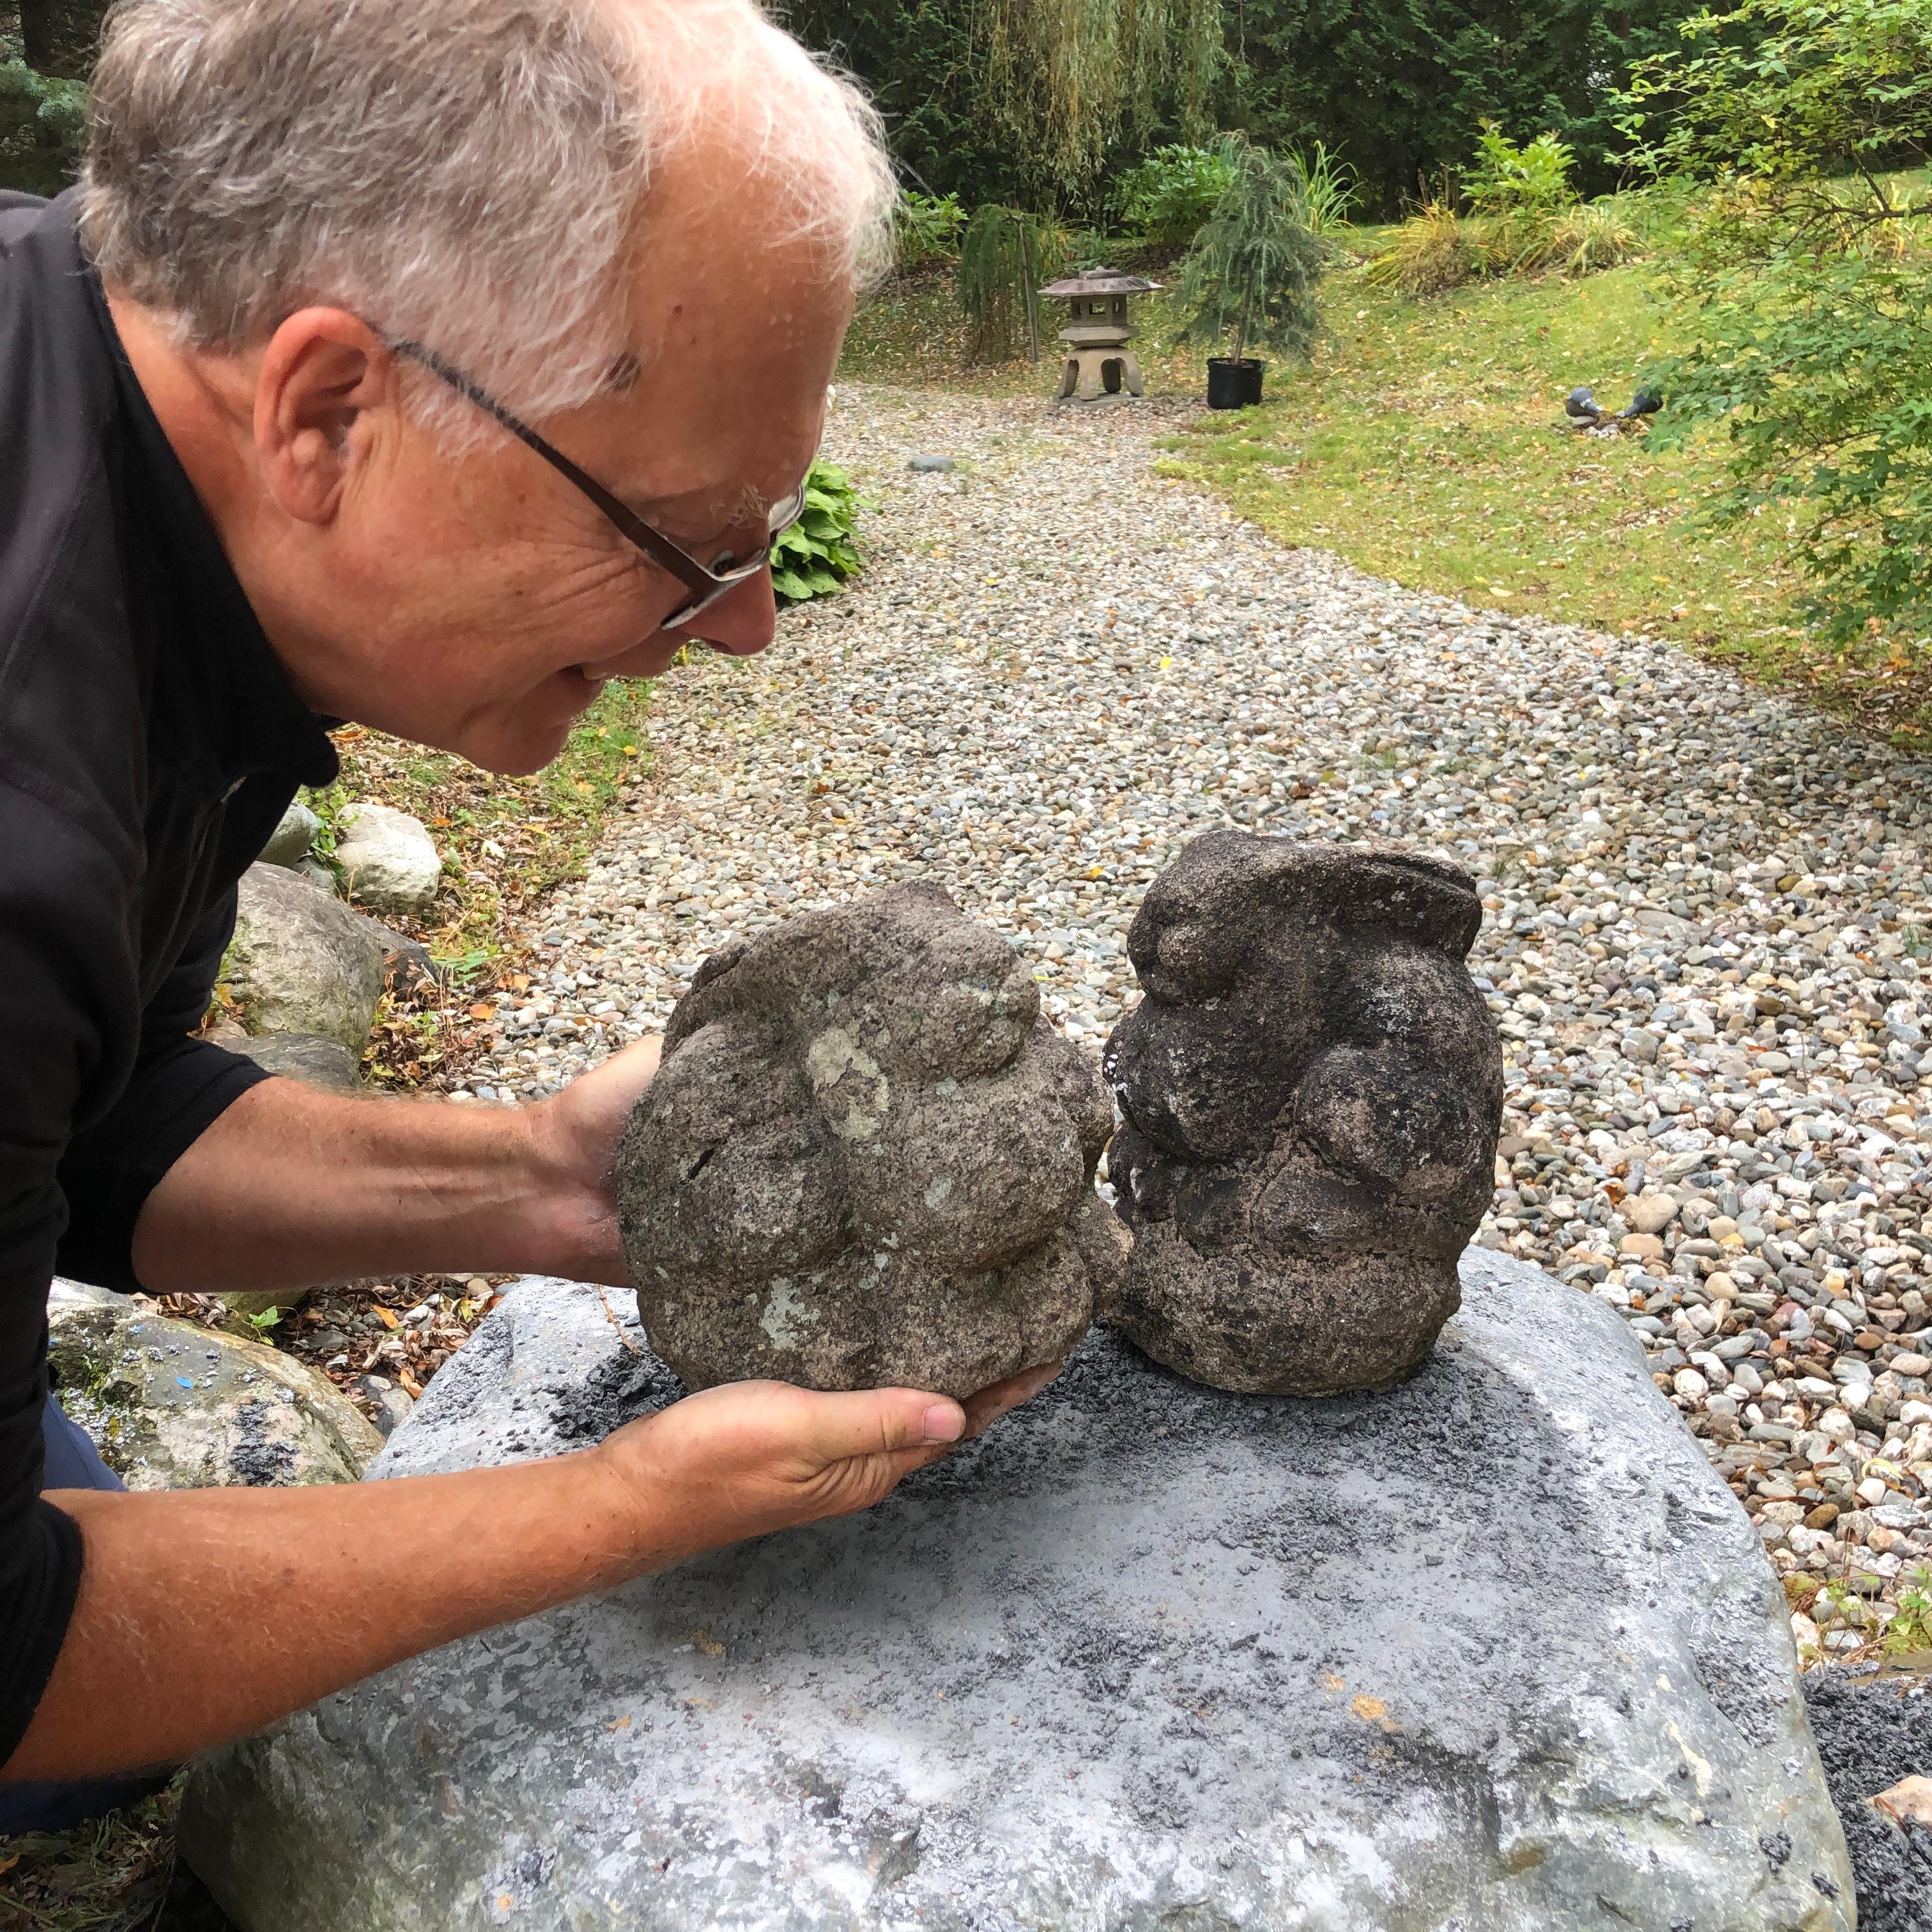 From our recent Japanese Acquisition Travels- a rare Pair

A good pair of antique hand carved 19th century granite stone rabbits. The first pair we have had the pleasure of owning- neat garden treasures from Japan. 

These are finely crafted hand